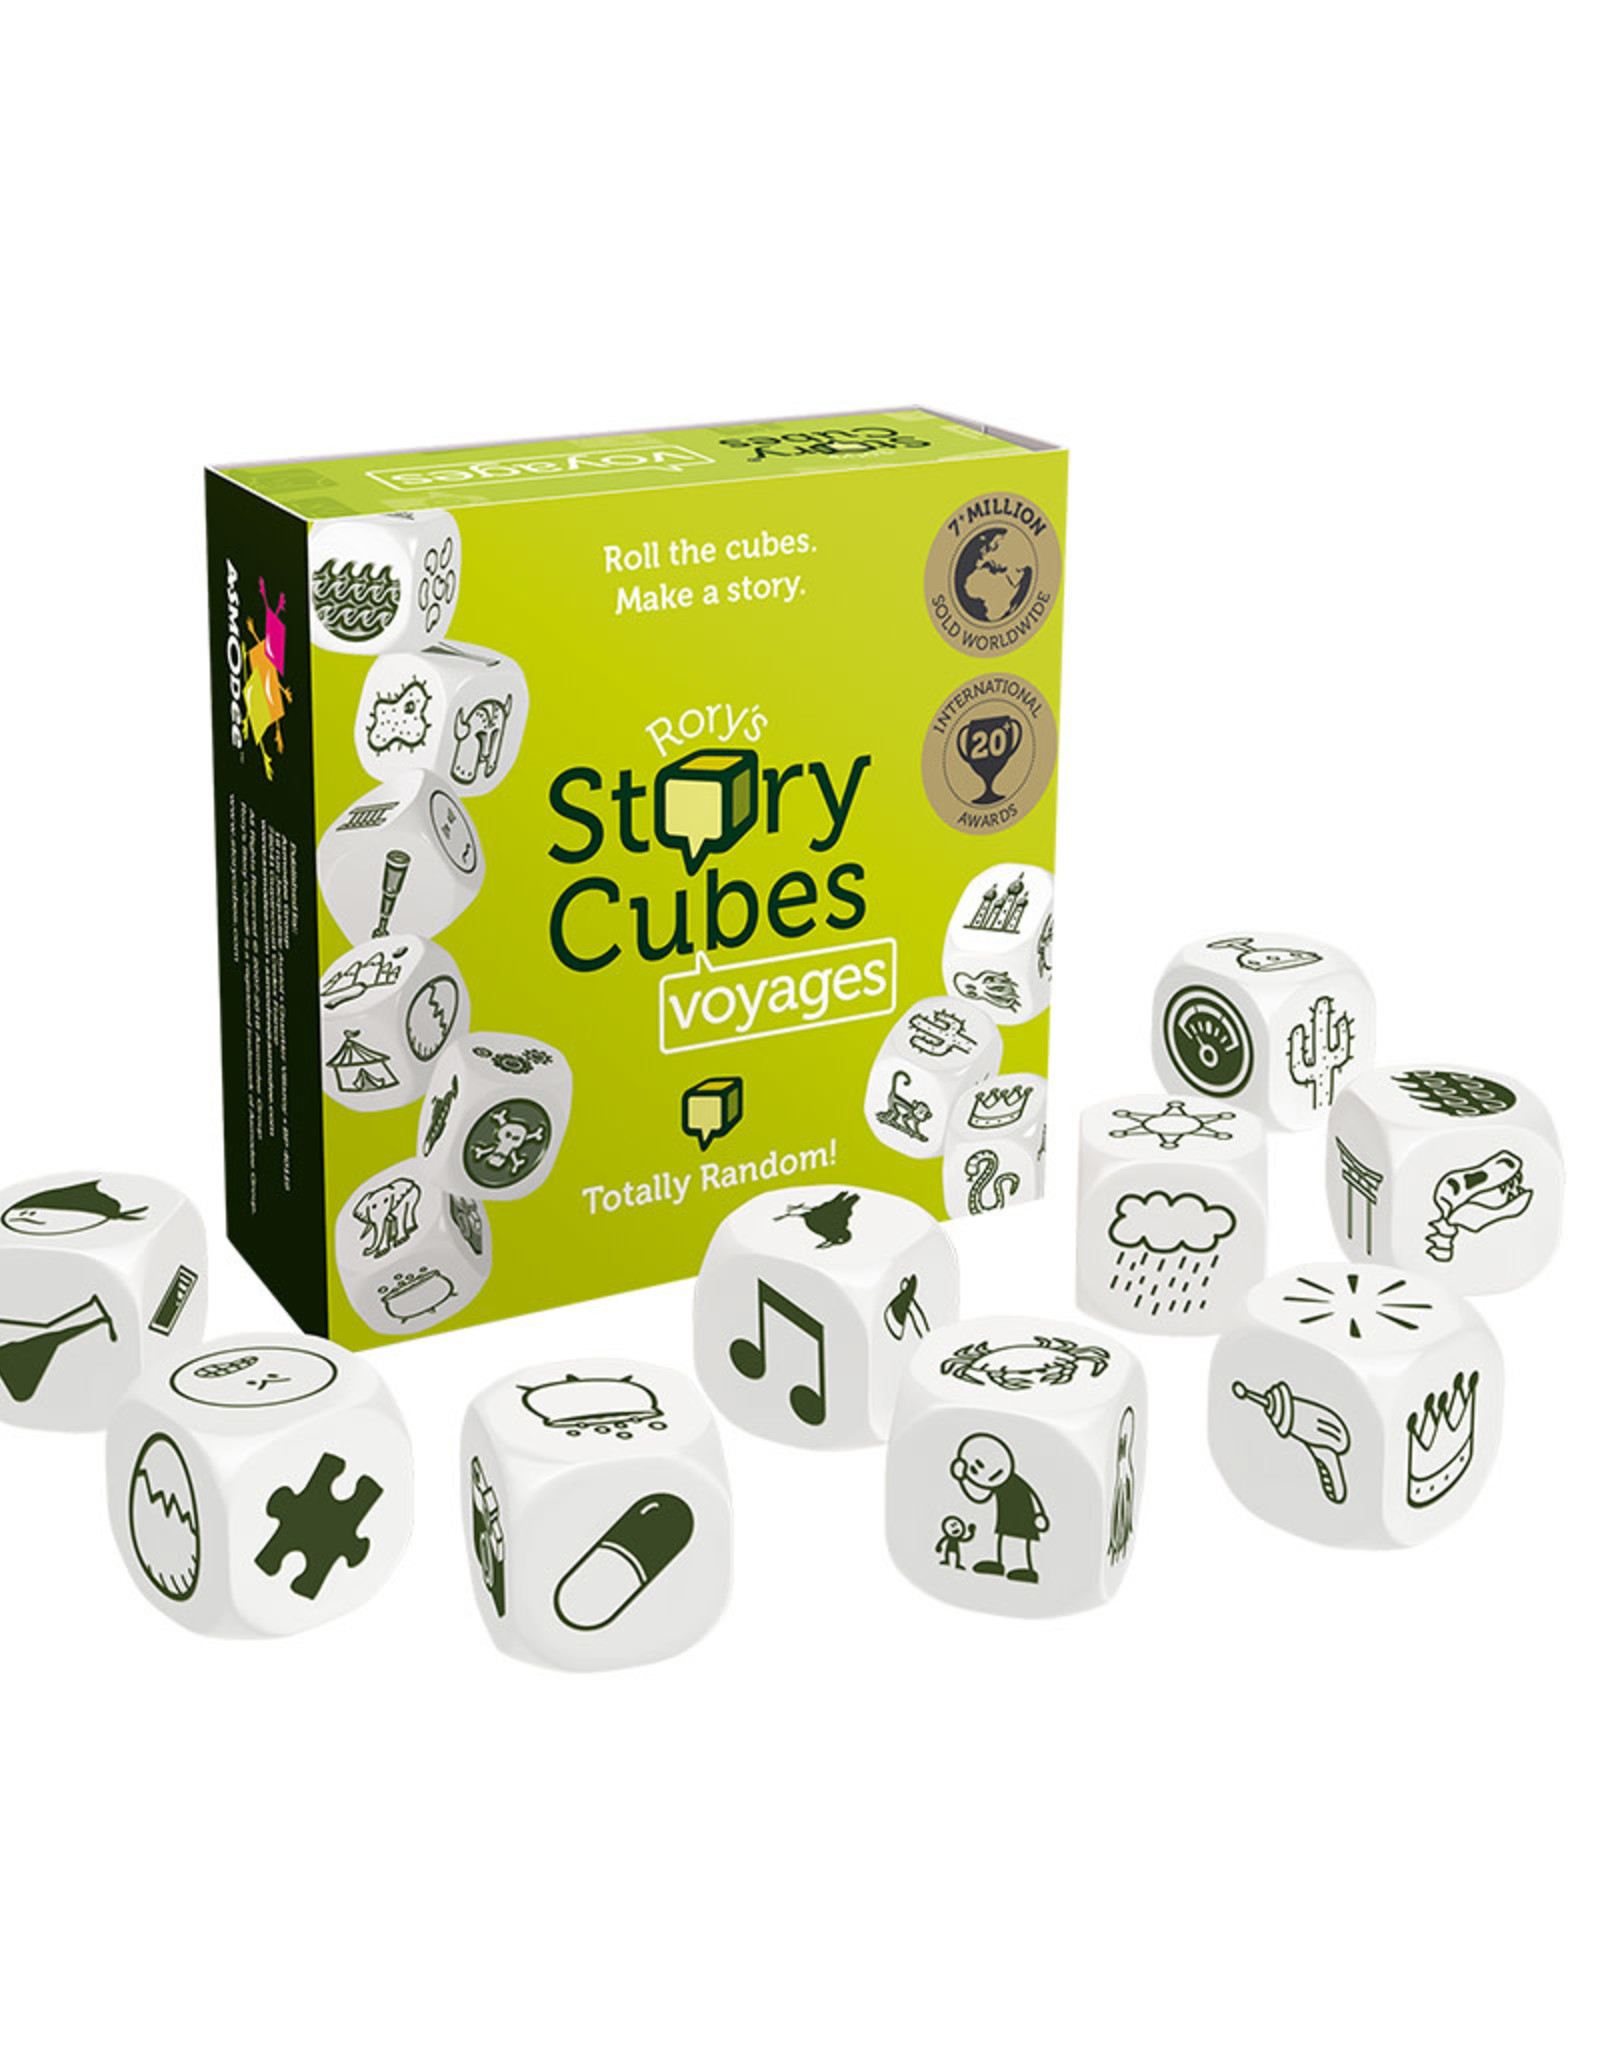 Rorys Store Cubes Rorys Story Cubes: Voyages Box (Green)